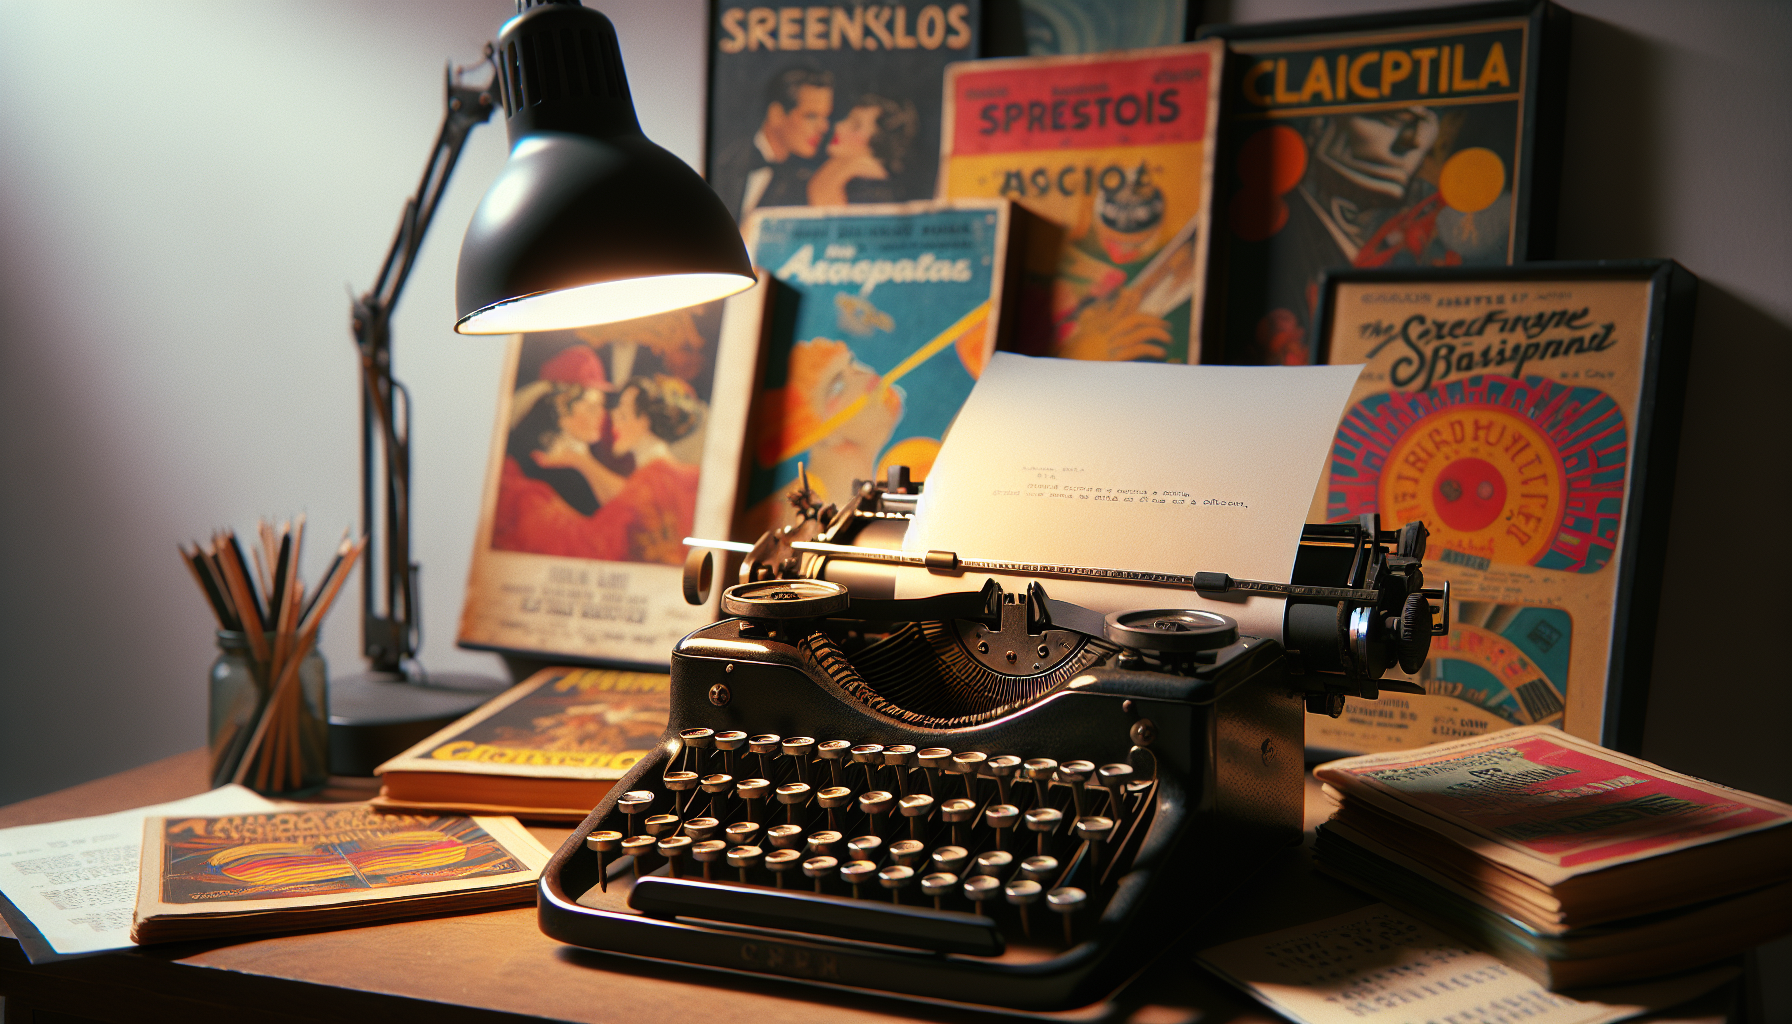 An open vintage typewriter with classic screenplays scattered around it under a soft desk lamp, highlighting titles like 'Casablanca', 'Chinatown', and 'Pulp Fiction', in a cozy, inspirational writing